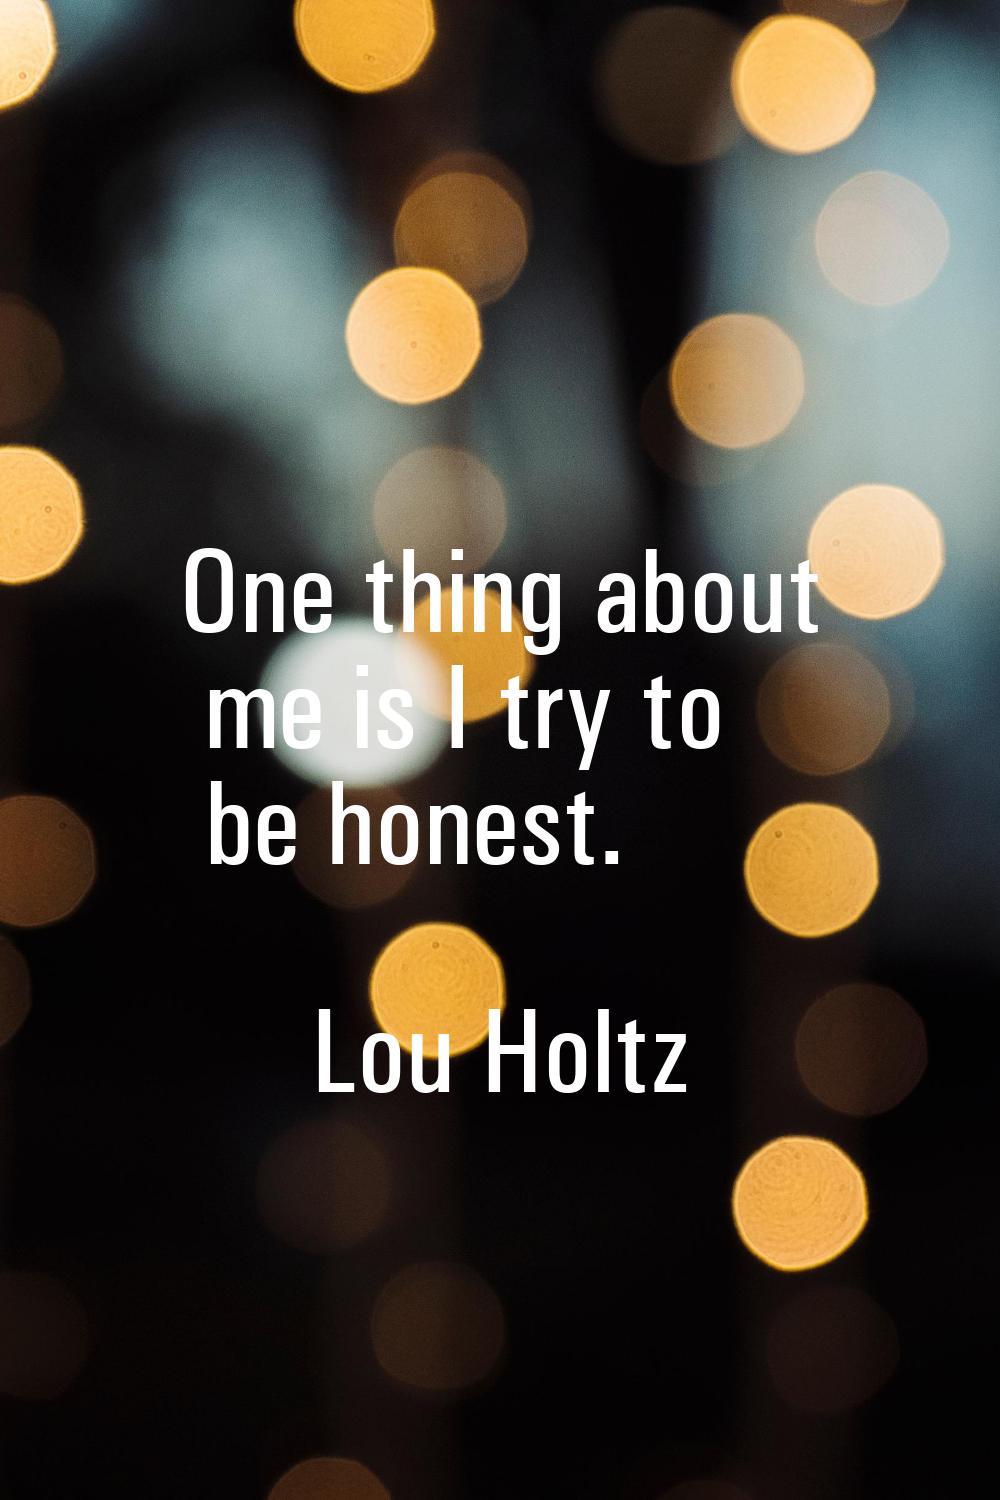 One thing about me is I try to be honest.